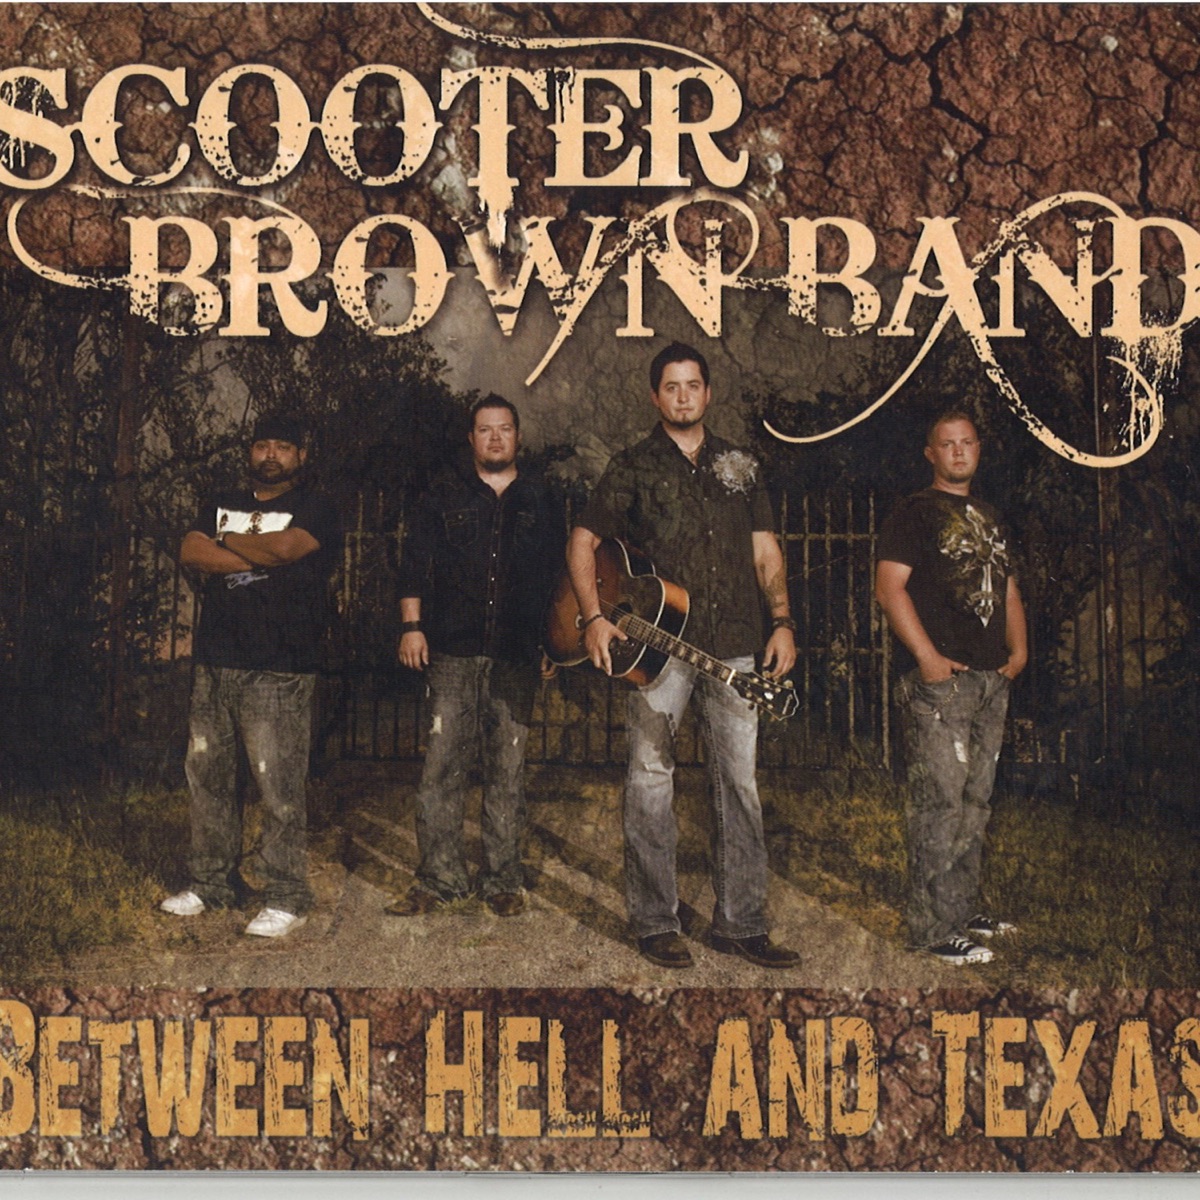 Between Hell and Texas by Scooter Brown Band on Apple Music